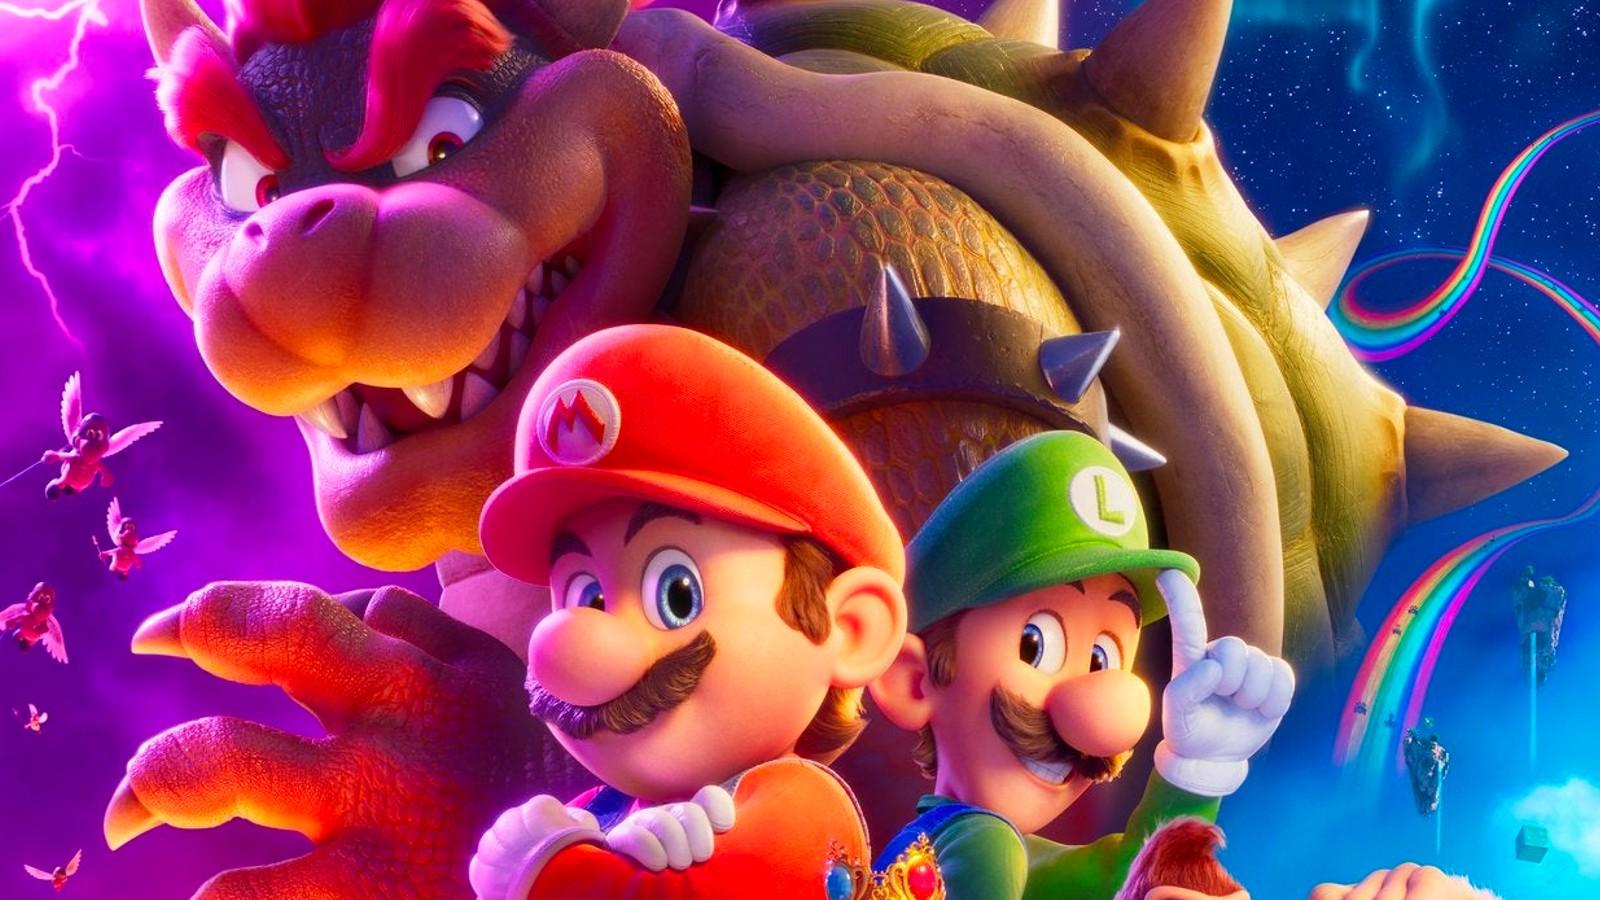 the poster for the Super Mario Bros movie